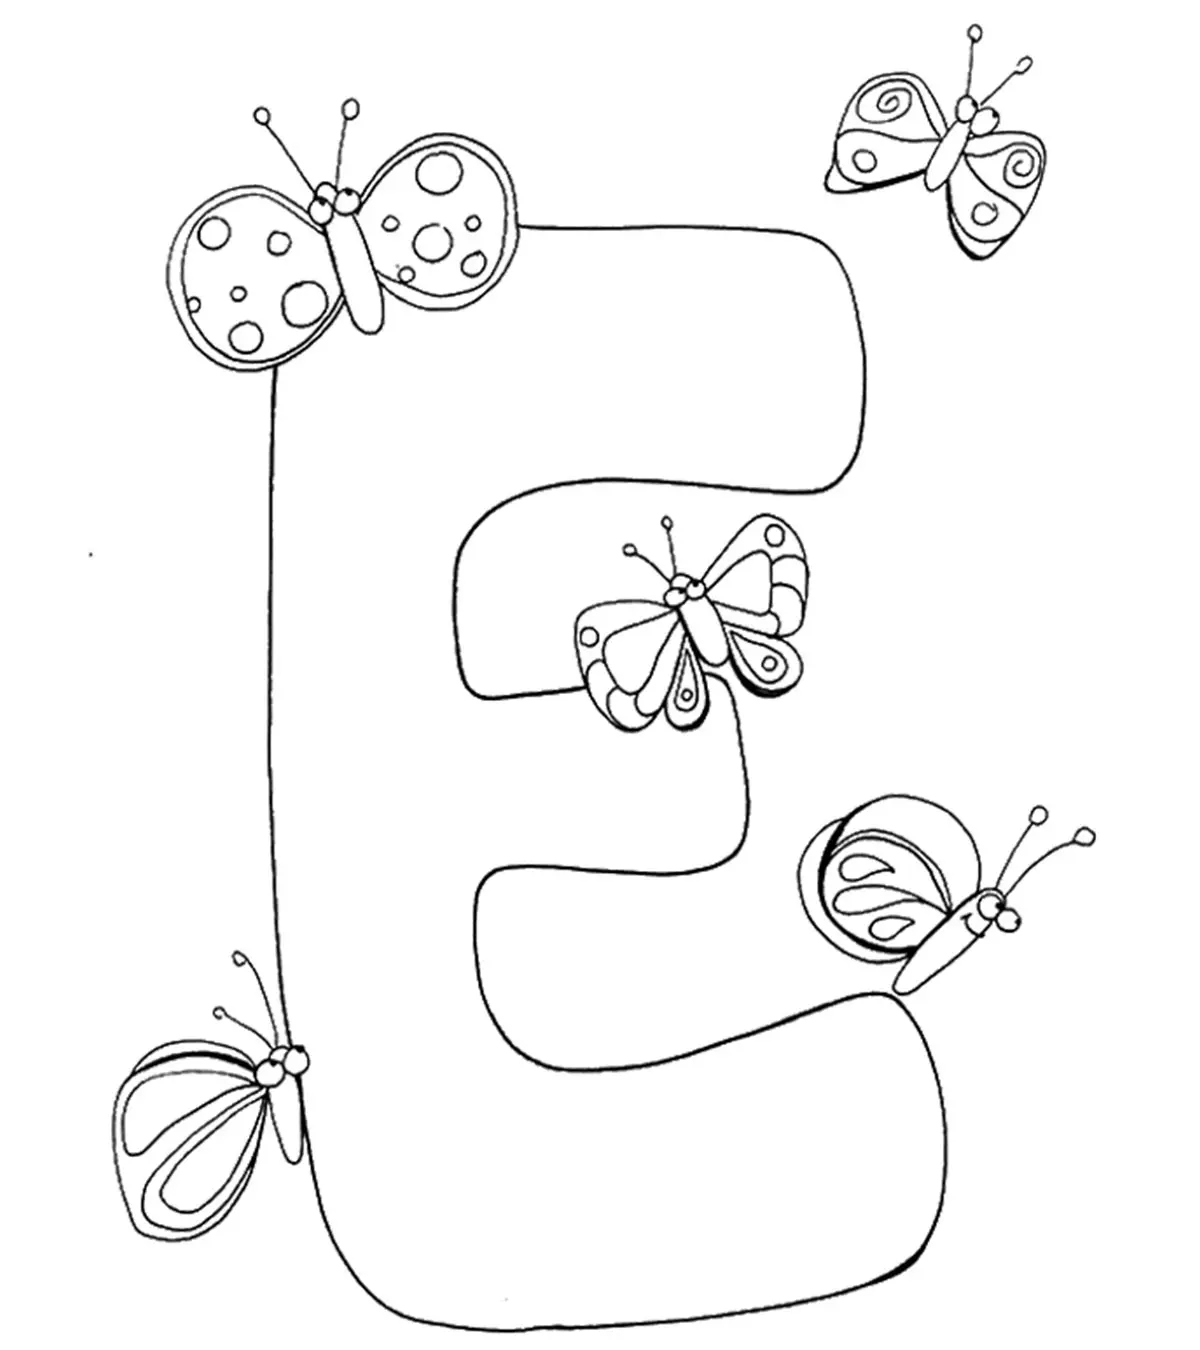 Top 10 Letter ‘E’ Coloring Pages Your Toddler Will Love To Learn & Color